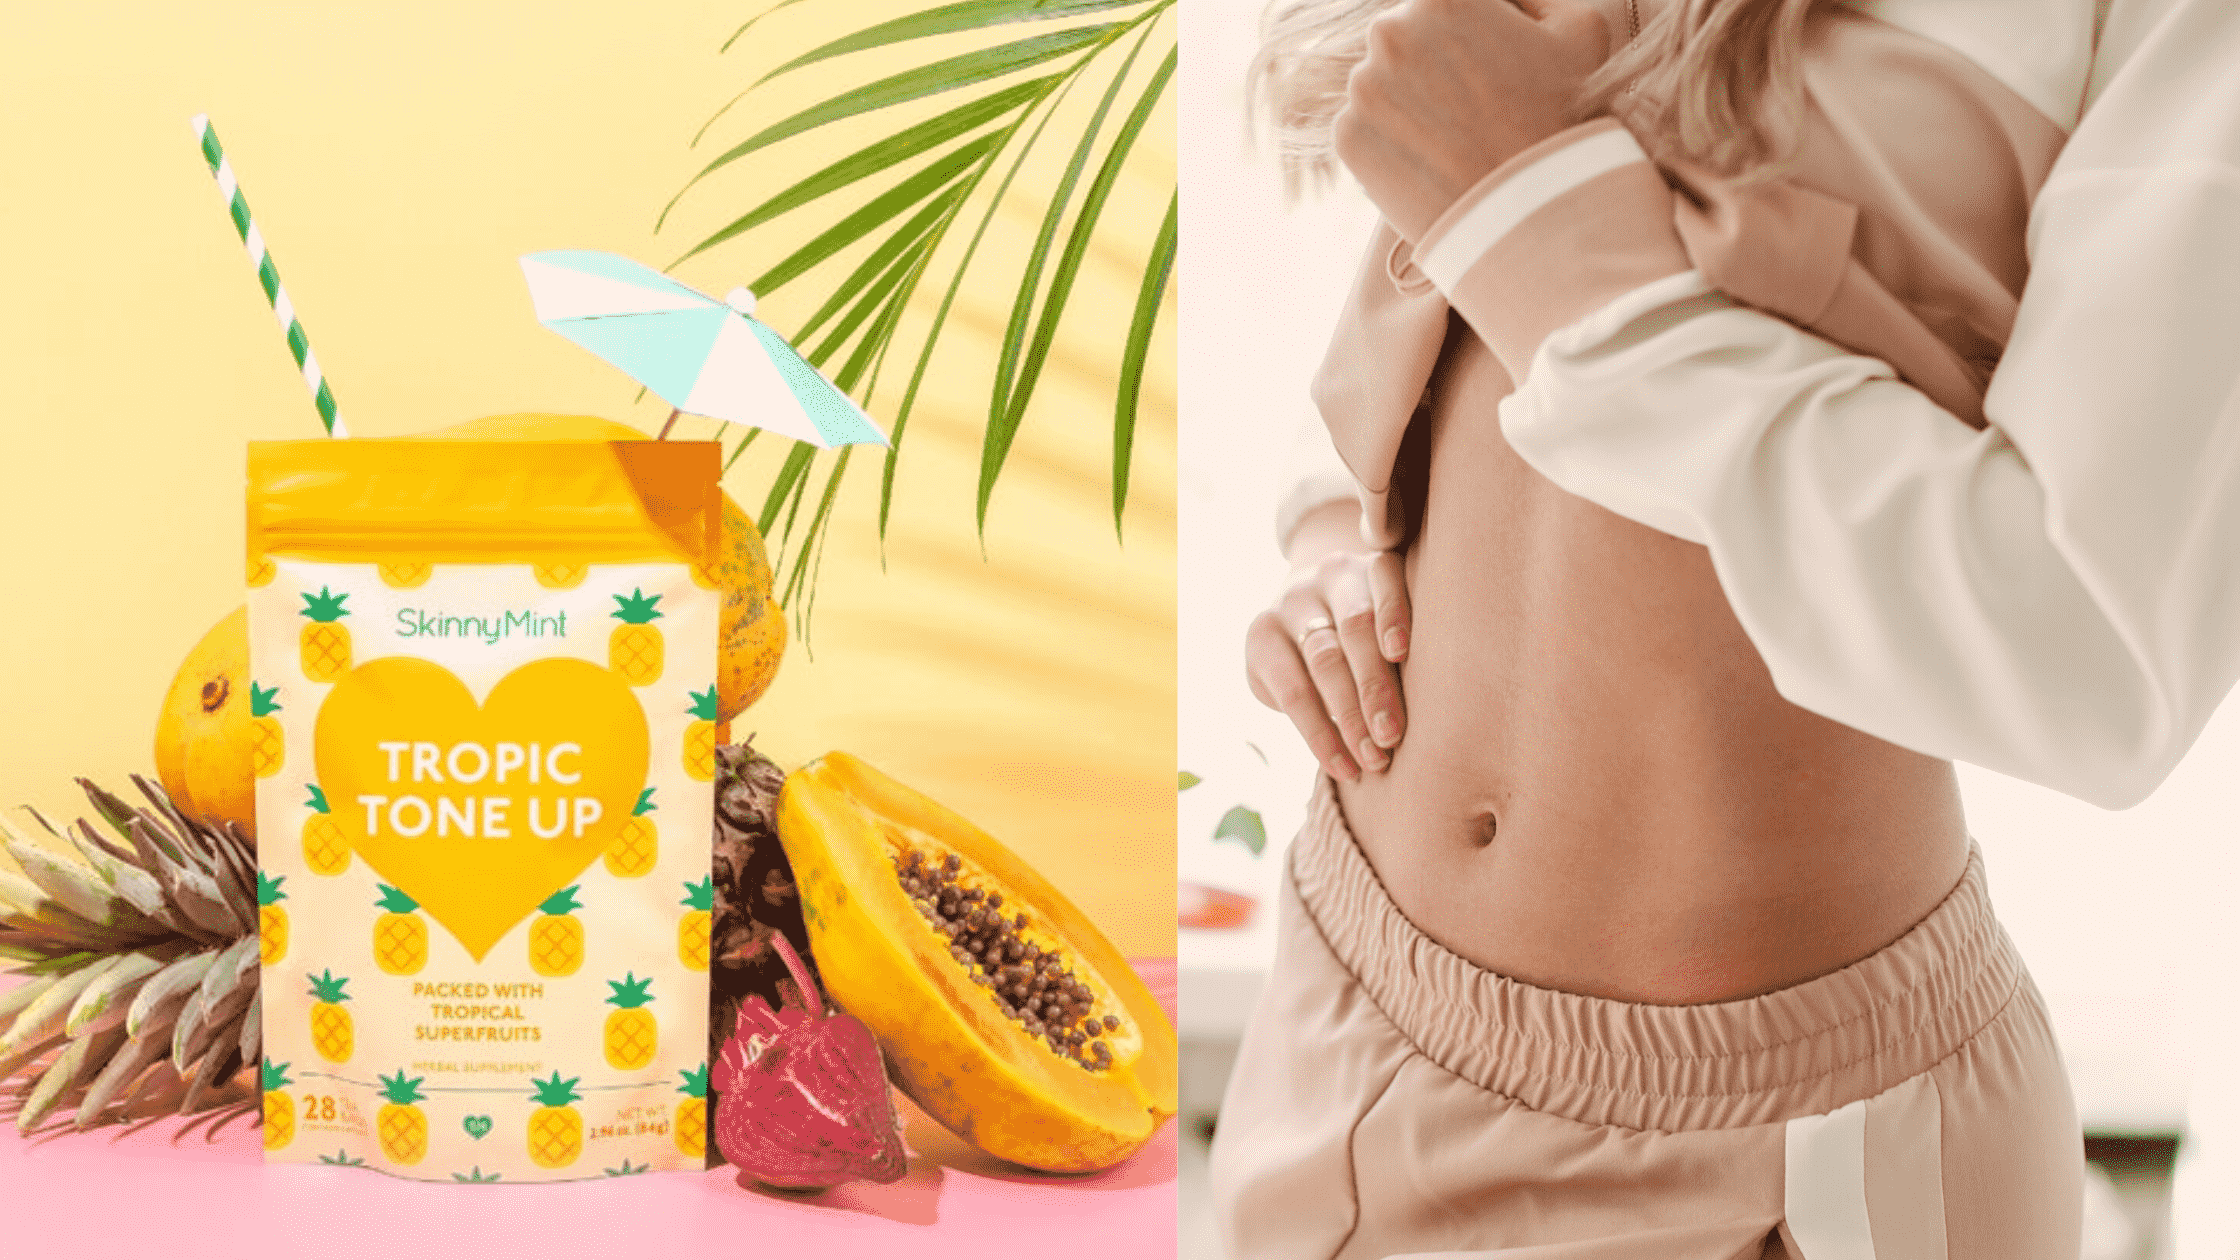 Tropic Tone Up next to a woman with a flat stomach after bloating has been reduced.